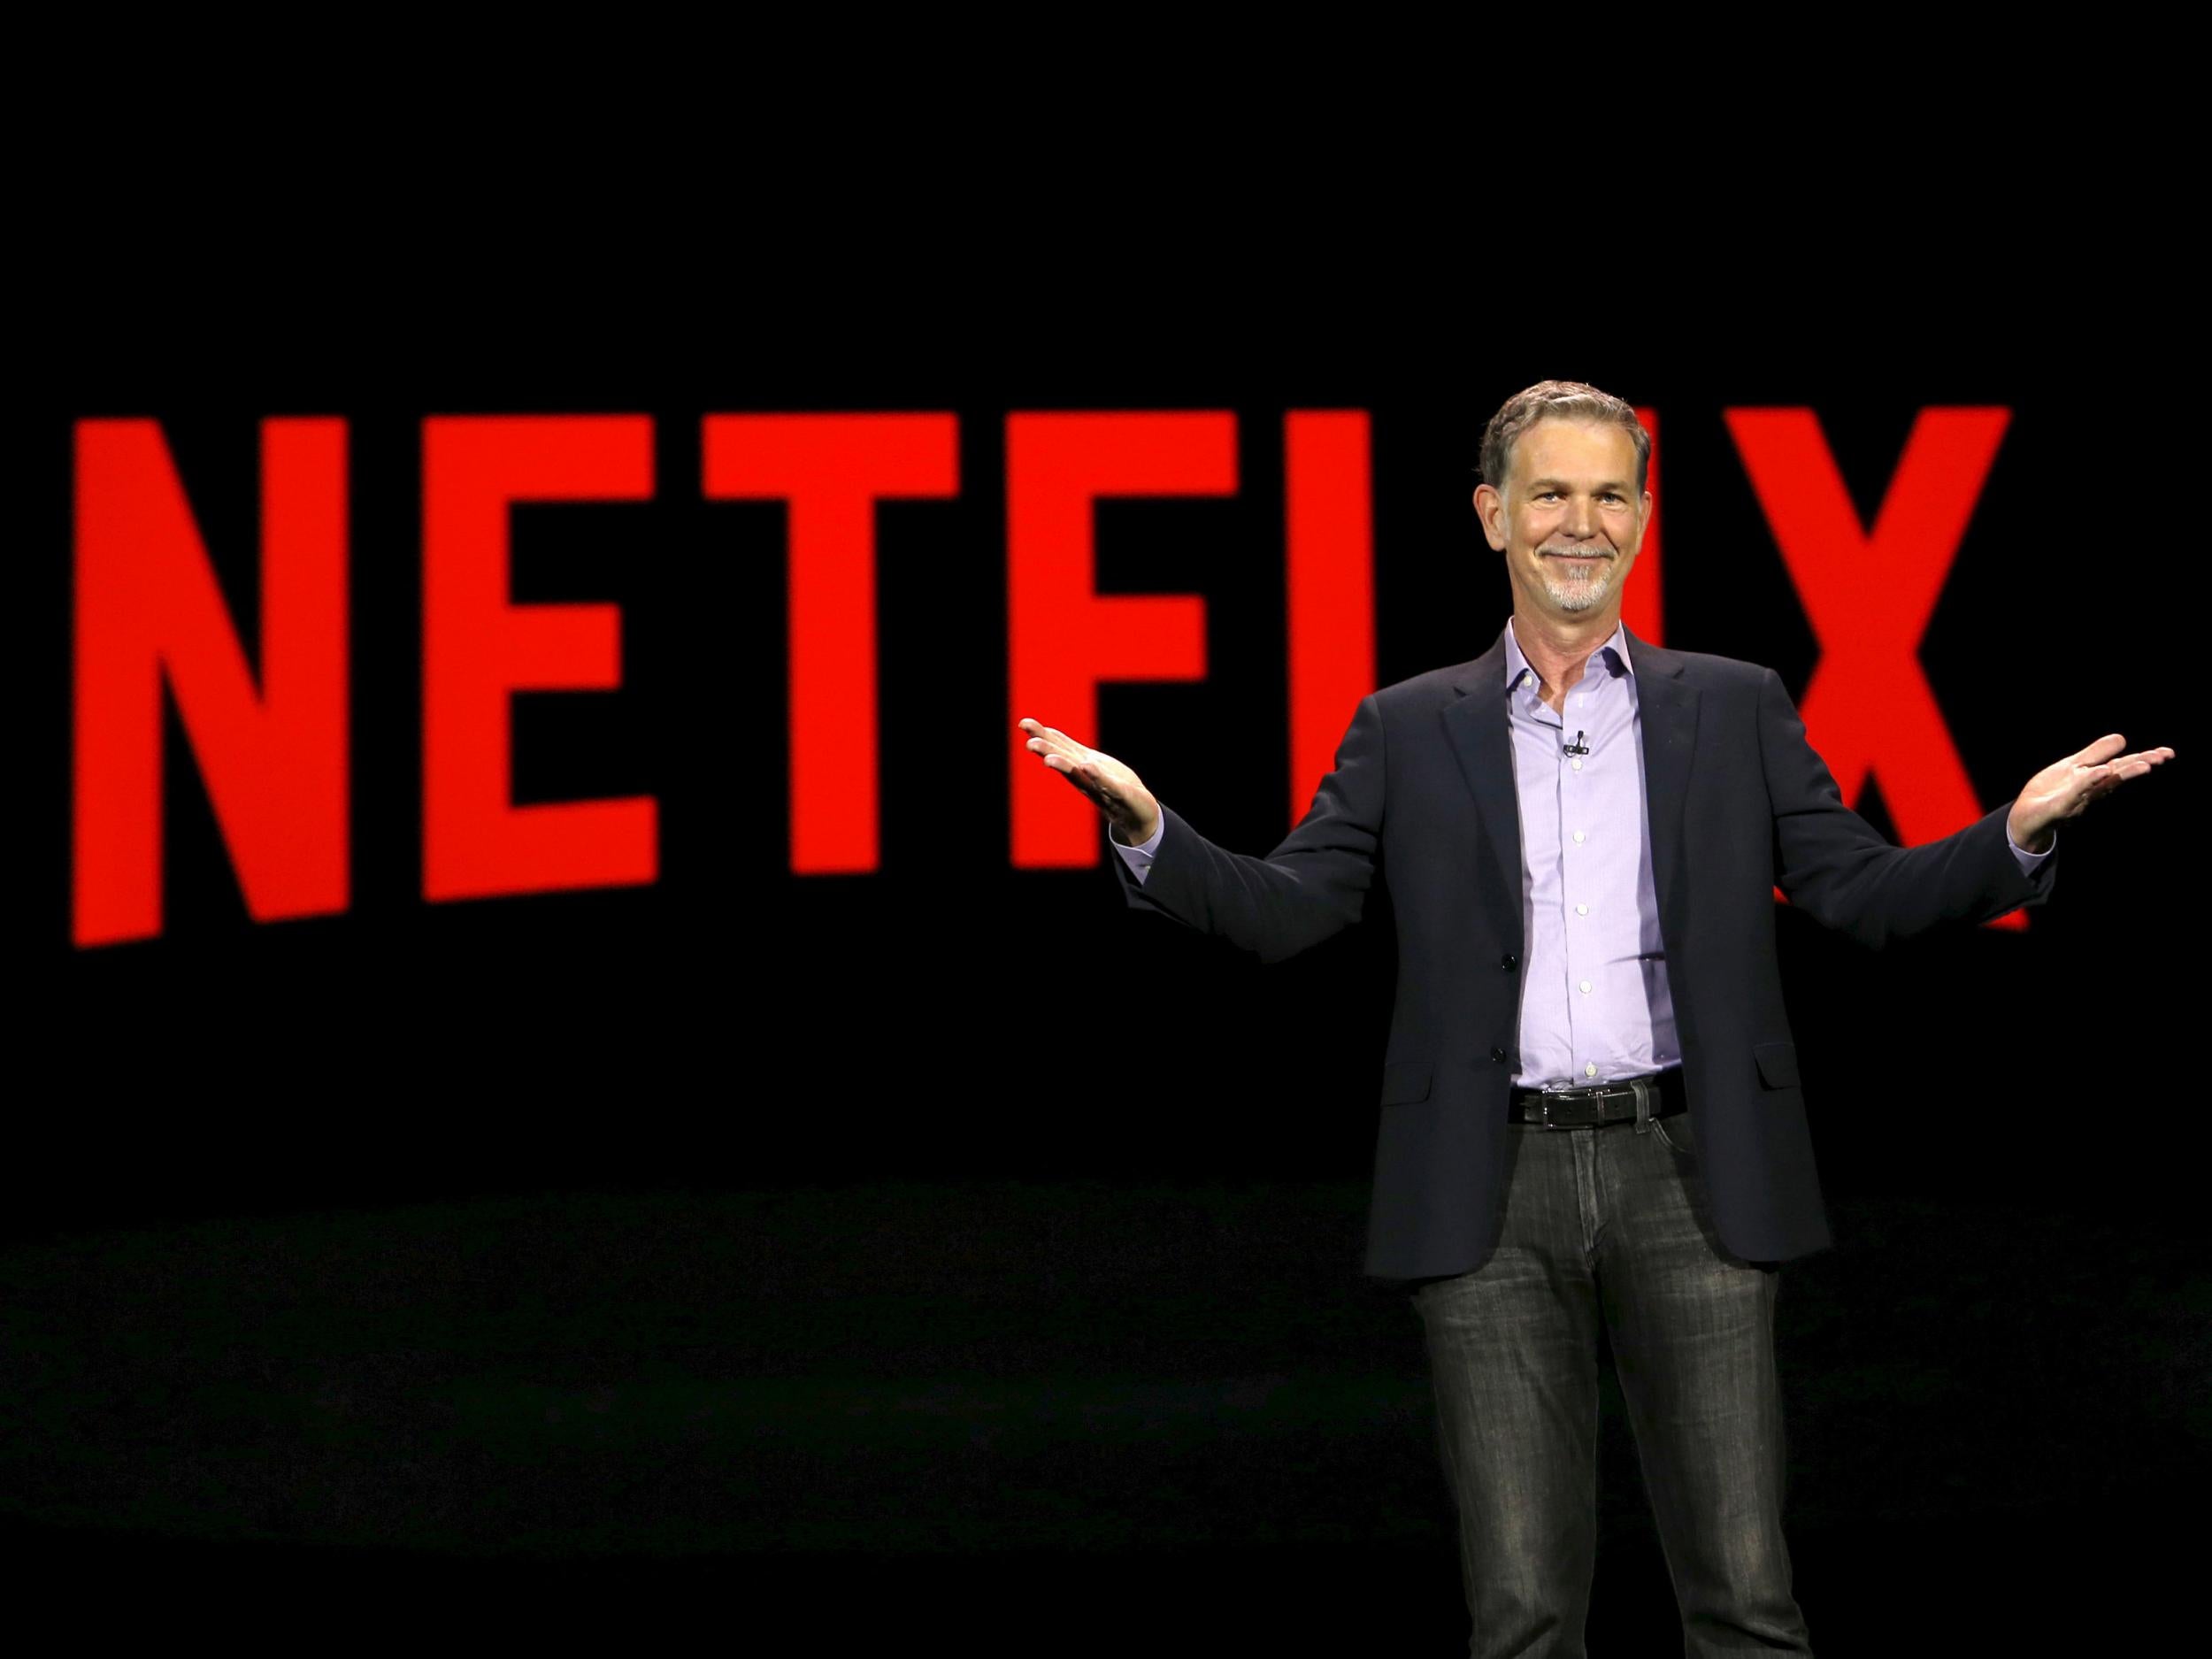 Netflix CEO Reed Hastings: ‘It could have been an internet virus which shut down our routers, and Disney, with theme parks, would be fine’